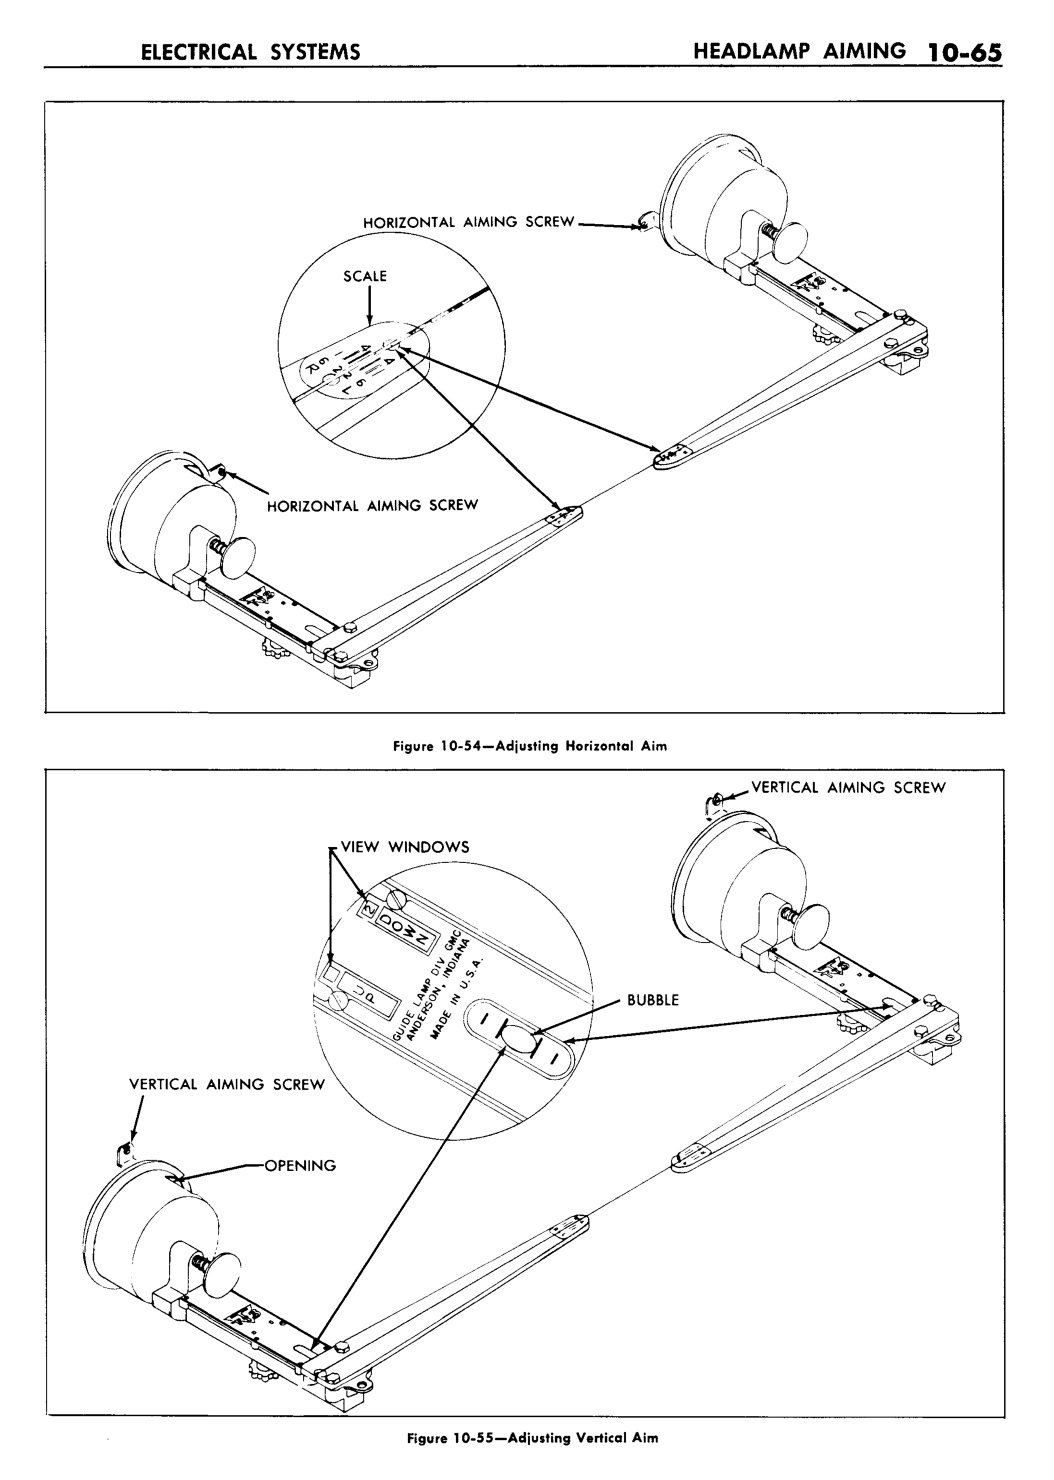 n_11 1960 Buick Shop Manual - Electrical Systems-065-065.jpg